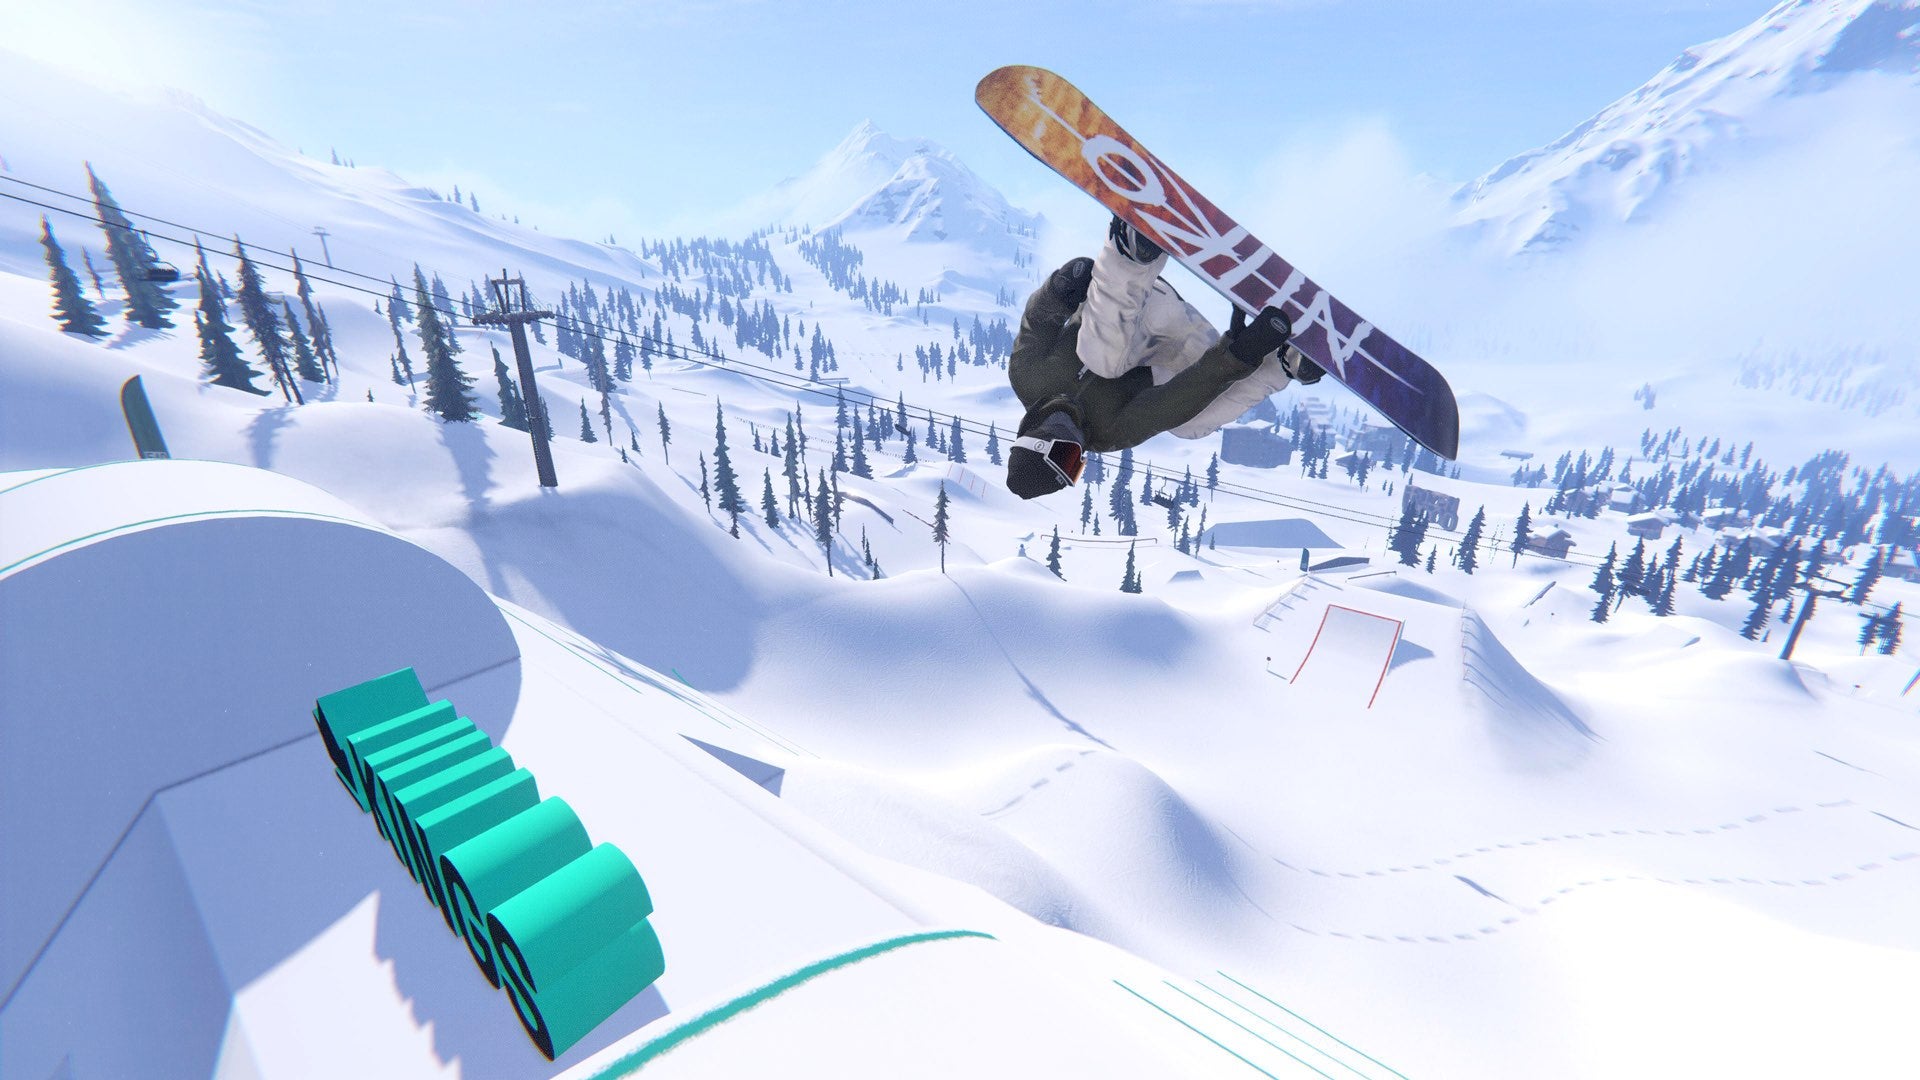 The Kings park in Shredders is directly inspired by The Nines. (Screenshot: FoamPunch)